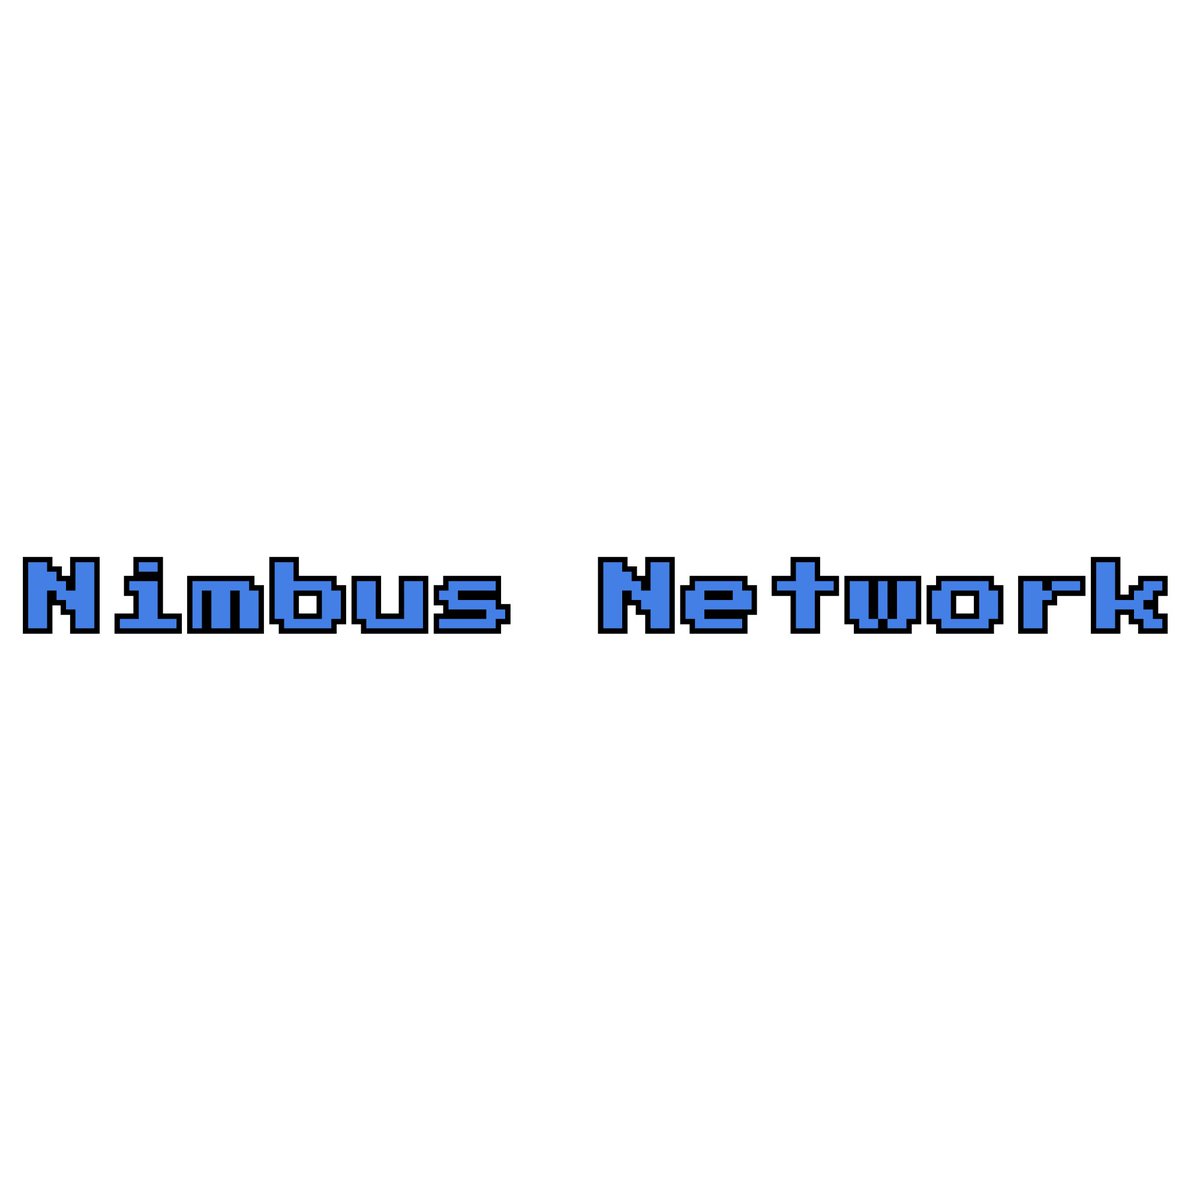 Unleash the power of cloud with #NimbusNetwork! Our peer-to-peer marketplace offers scalable computing resources & AI capabilities. Buy & sell computing power on-demand. #nimbusnetwork $Nimbus